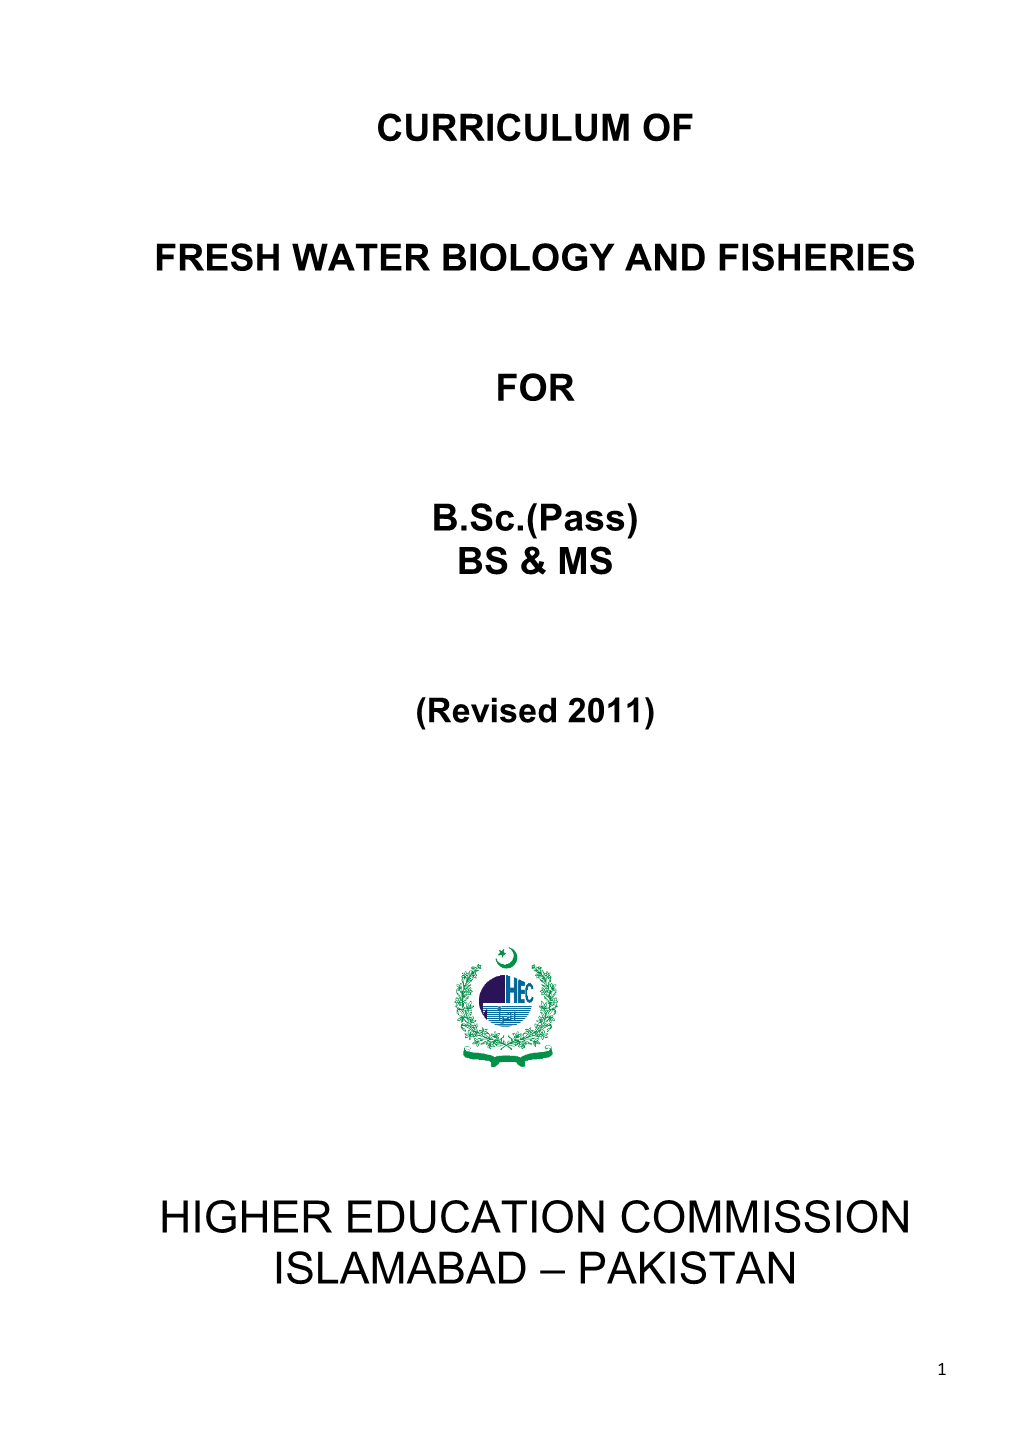 Curriculum of Fresh Water Biology and Fisheries for B